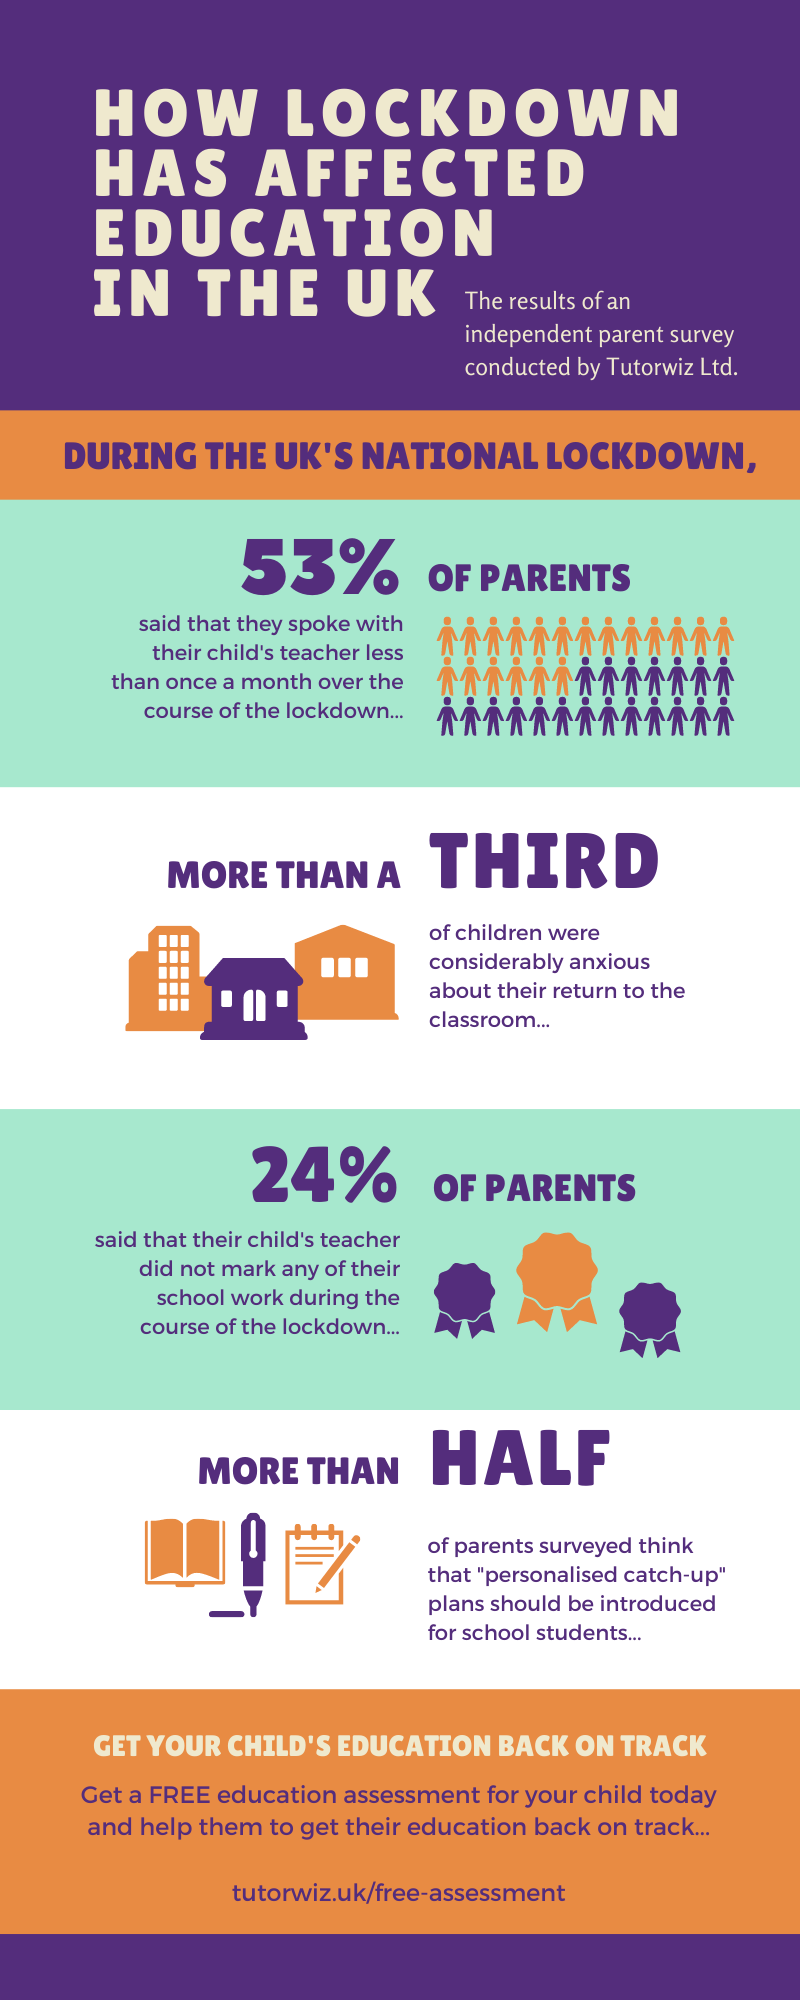 HOW LOCKDOWN HAS EFFECTED EDUCATION IN THE UK The results of an independent parent survey conducted by Tutorwiz Ltd. DURING THE UK'S NATIONAL LOCKDOWN, 53% OF PARENTS said that they spoke with their child's teacher less than once a month over the course of the lockdown... MORE THAN A THIRD of children were considerably anxious about their return to the classroom... 24% OF PARENTS said that their child's teacher did not mark any of their school work during the course of the lockdown... MORE THAN HALF of parents surveyed think that "personalised catch-up" plans should be introduced for school students... GET YOUR CHILD'S EDUCATION BACK ON TRACK Get a FREE education assessment for your child today and help them to get their education back on track... tutorwiz.uk/free-assessment